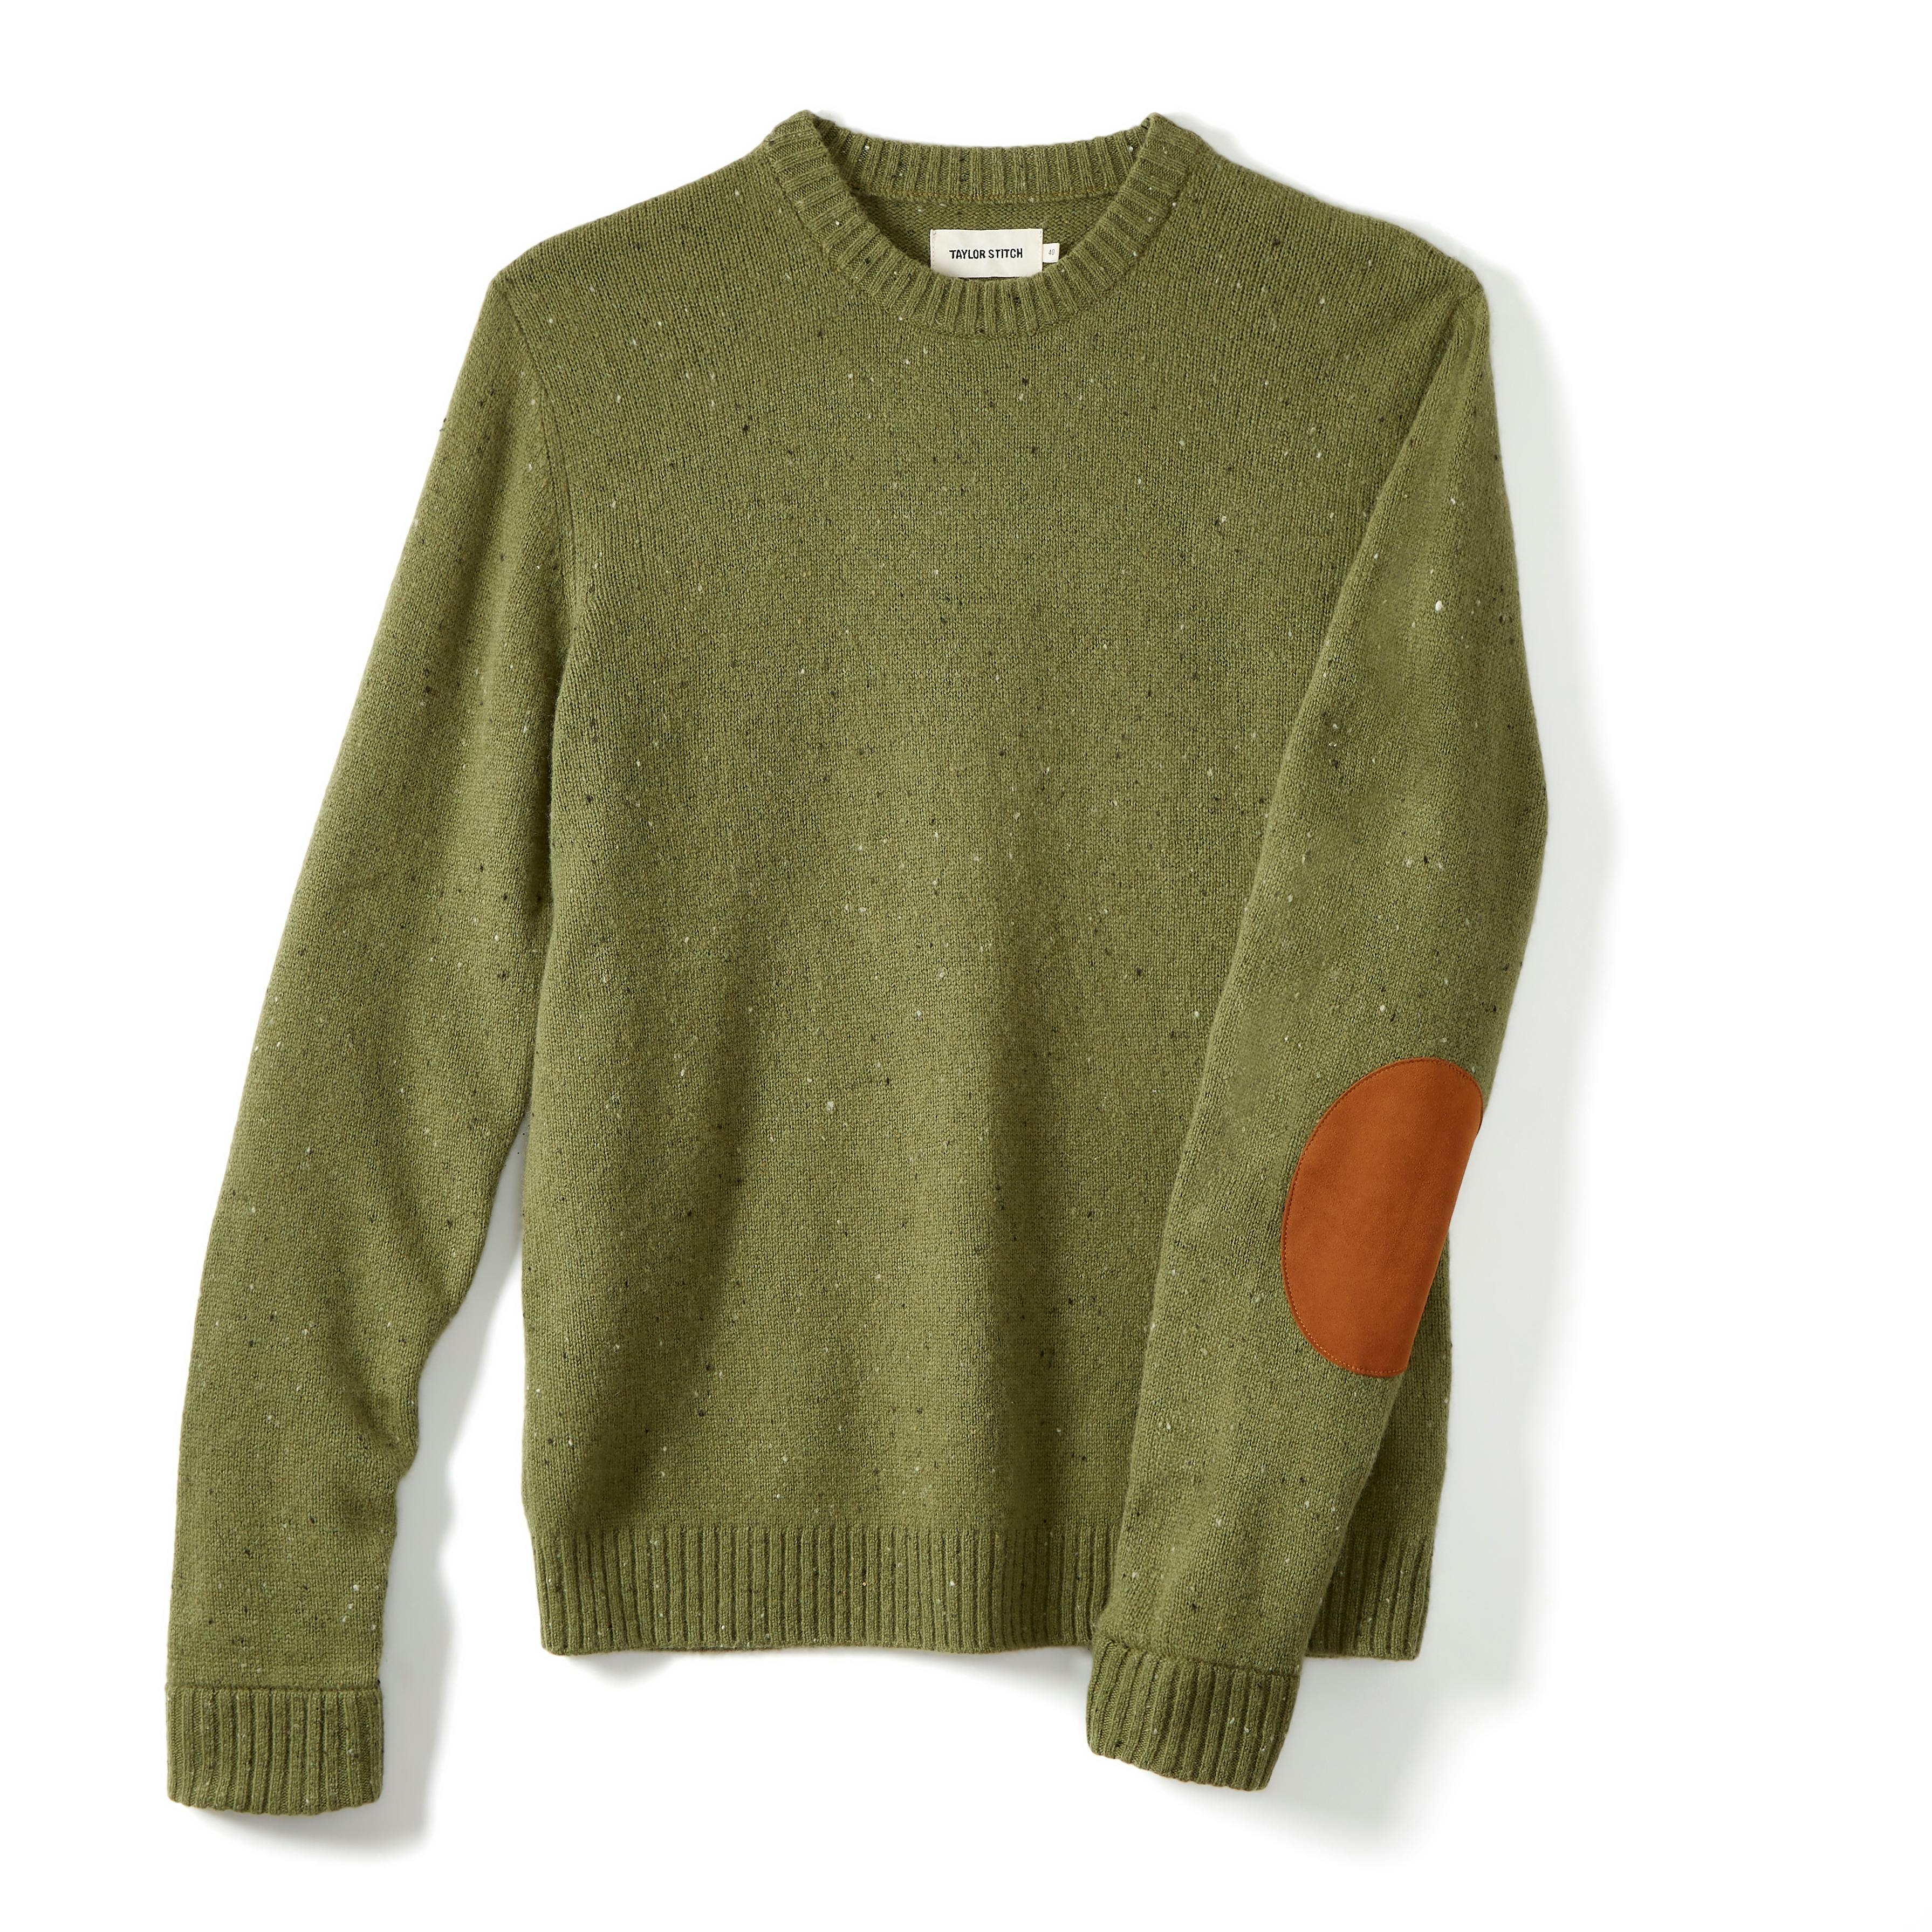 The Hardtack Sweater - Exclusive